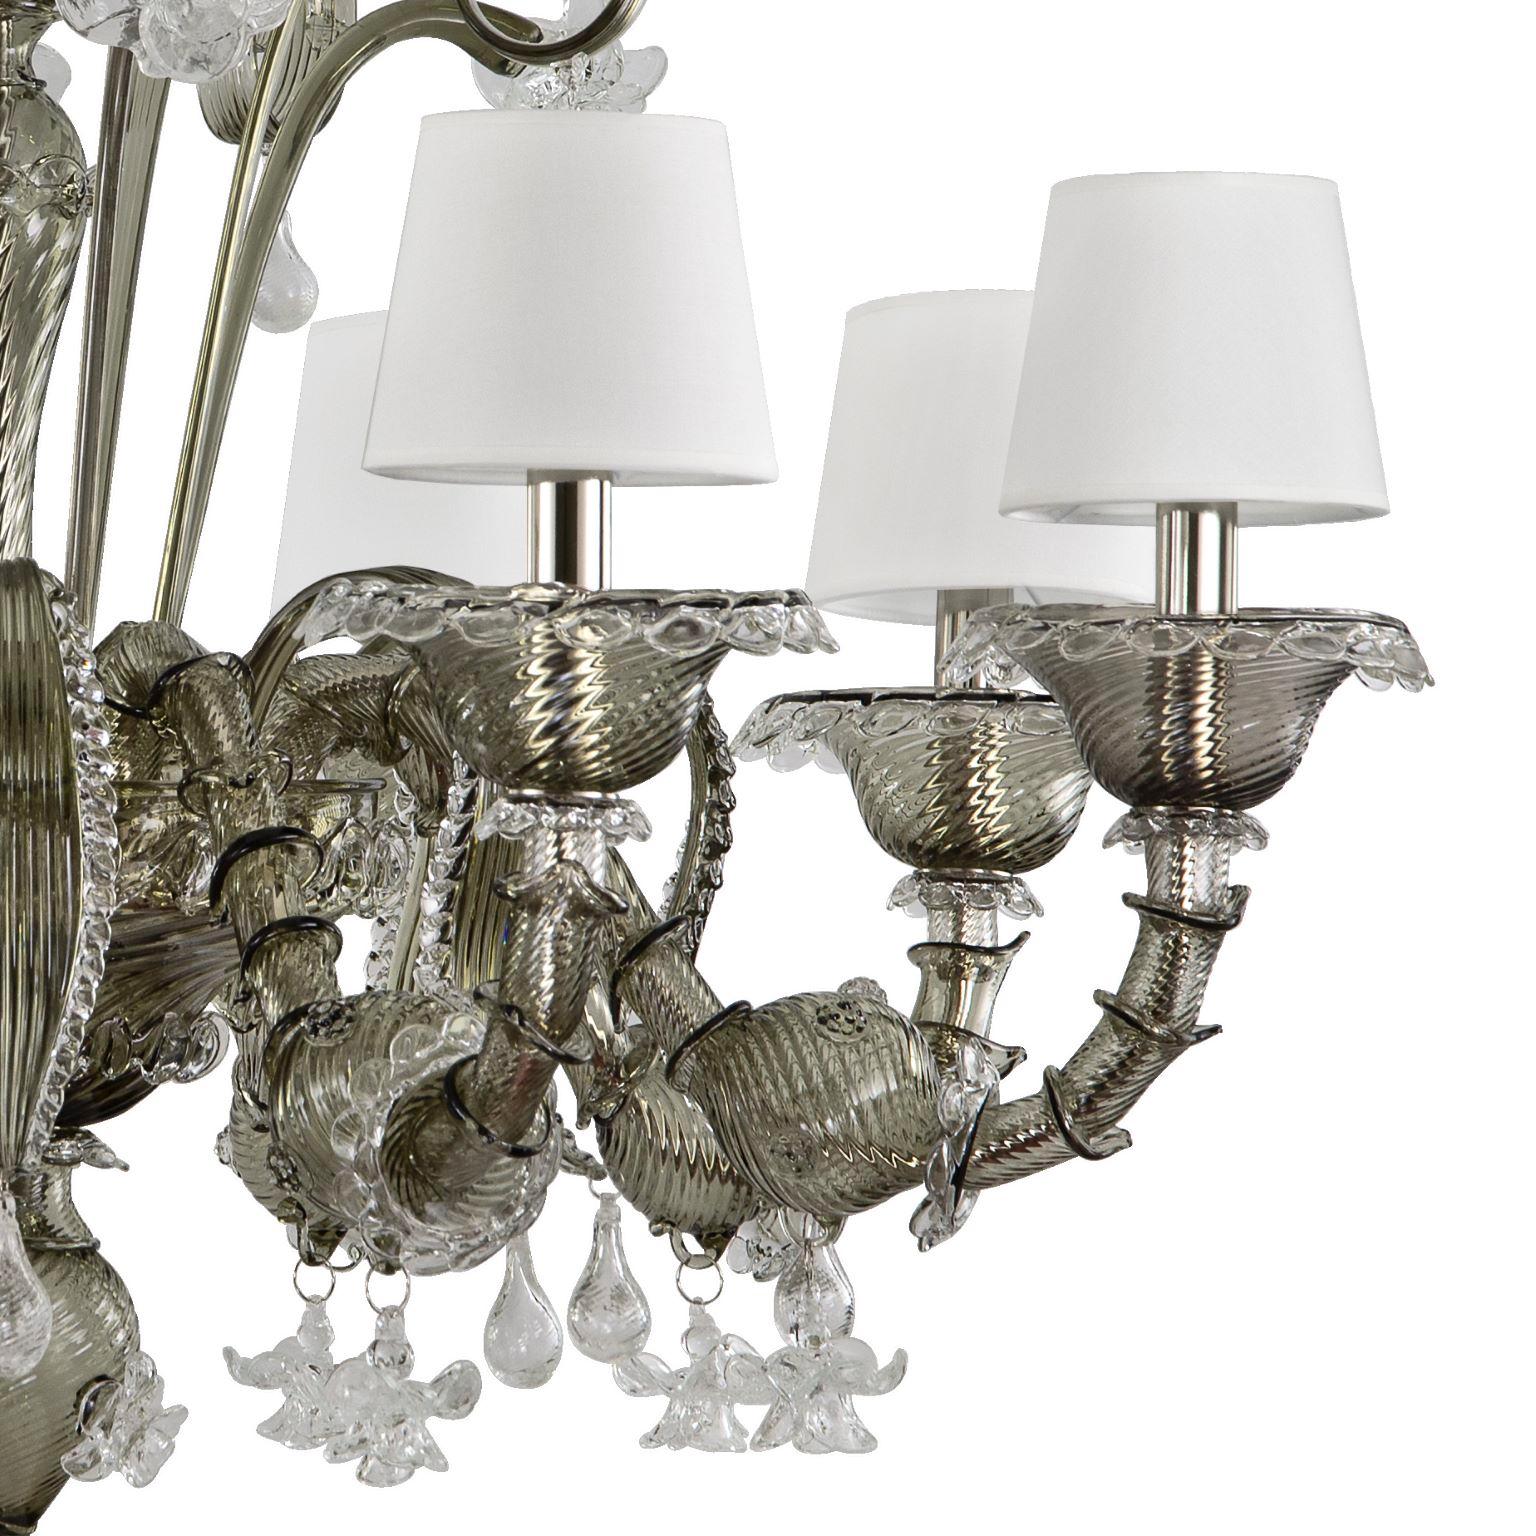 Classic Chandelier, 8Lights, Grey Murano Glass, lampshades V-Magic by Multiforme In New Condition For Sale In Trebaseleghe, IT